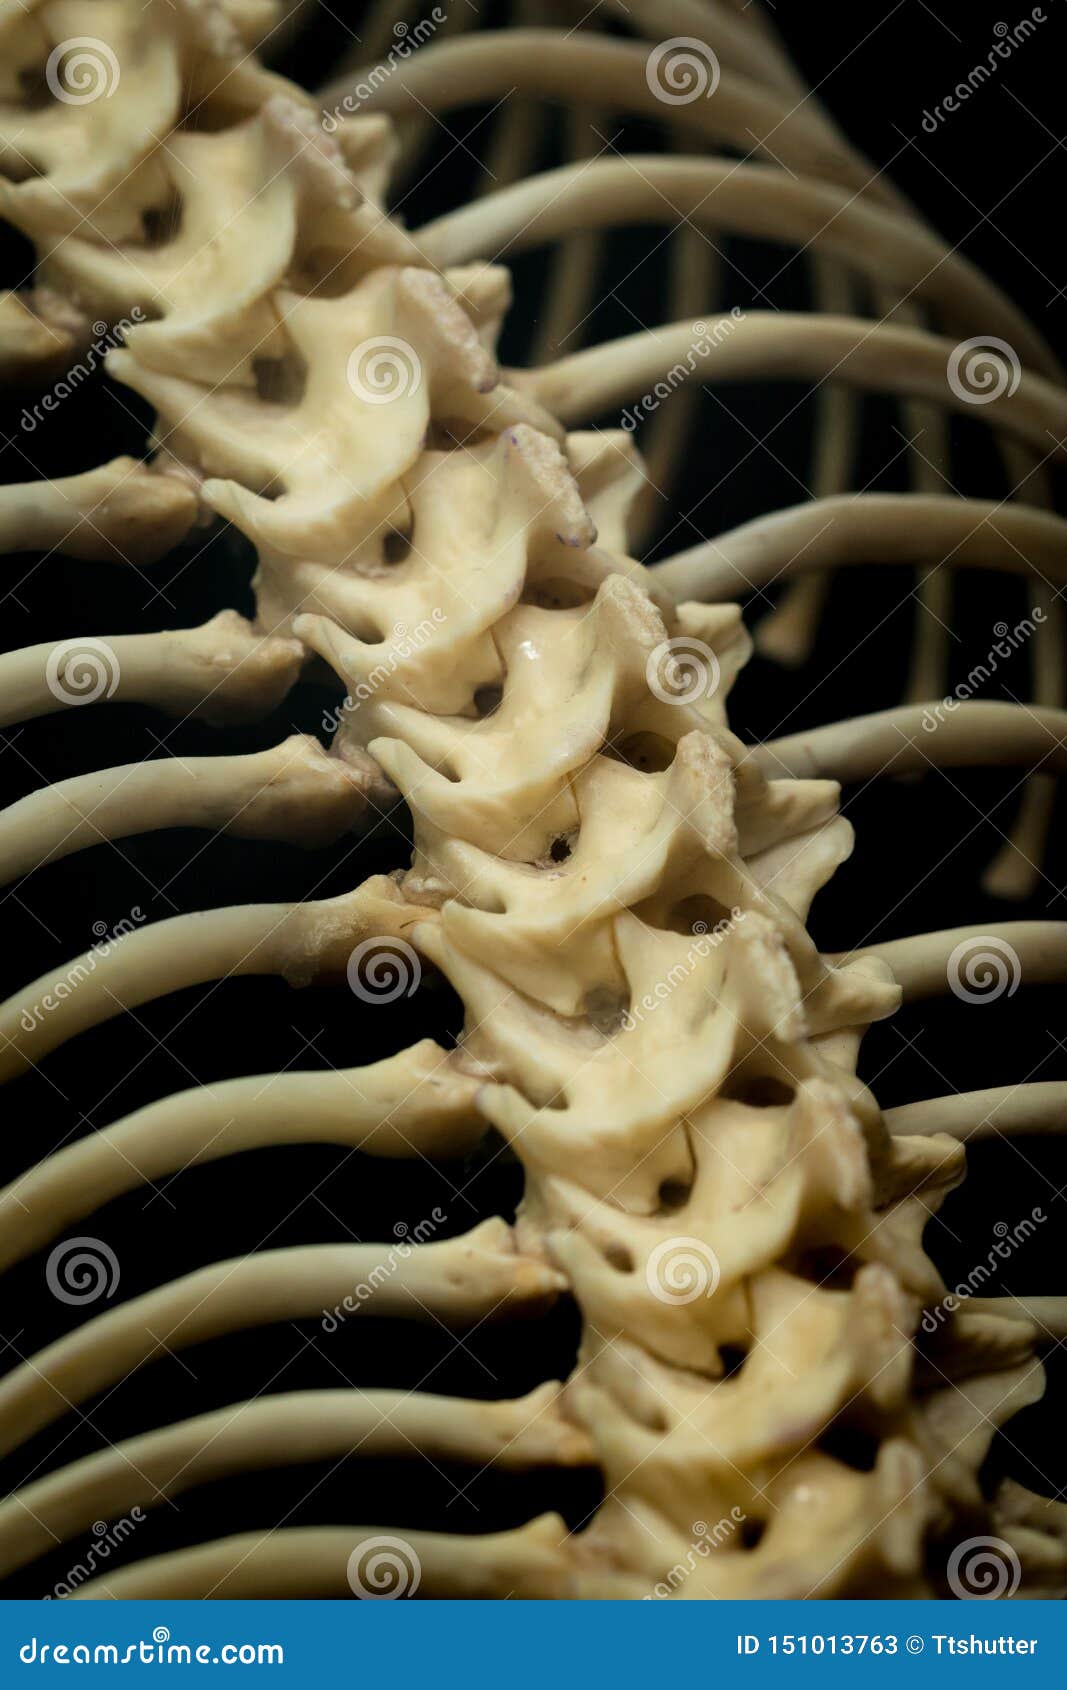 The bone of a snake editorial stock photo. Image of show - 151013763